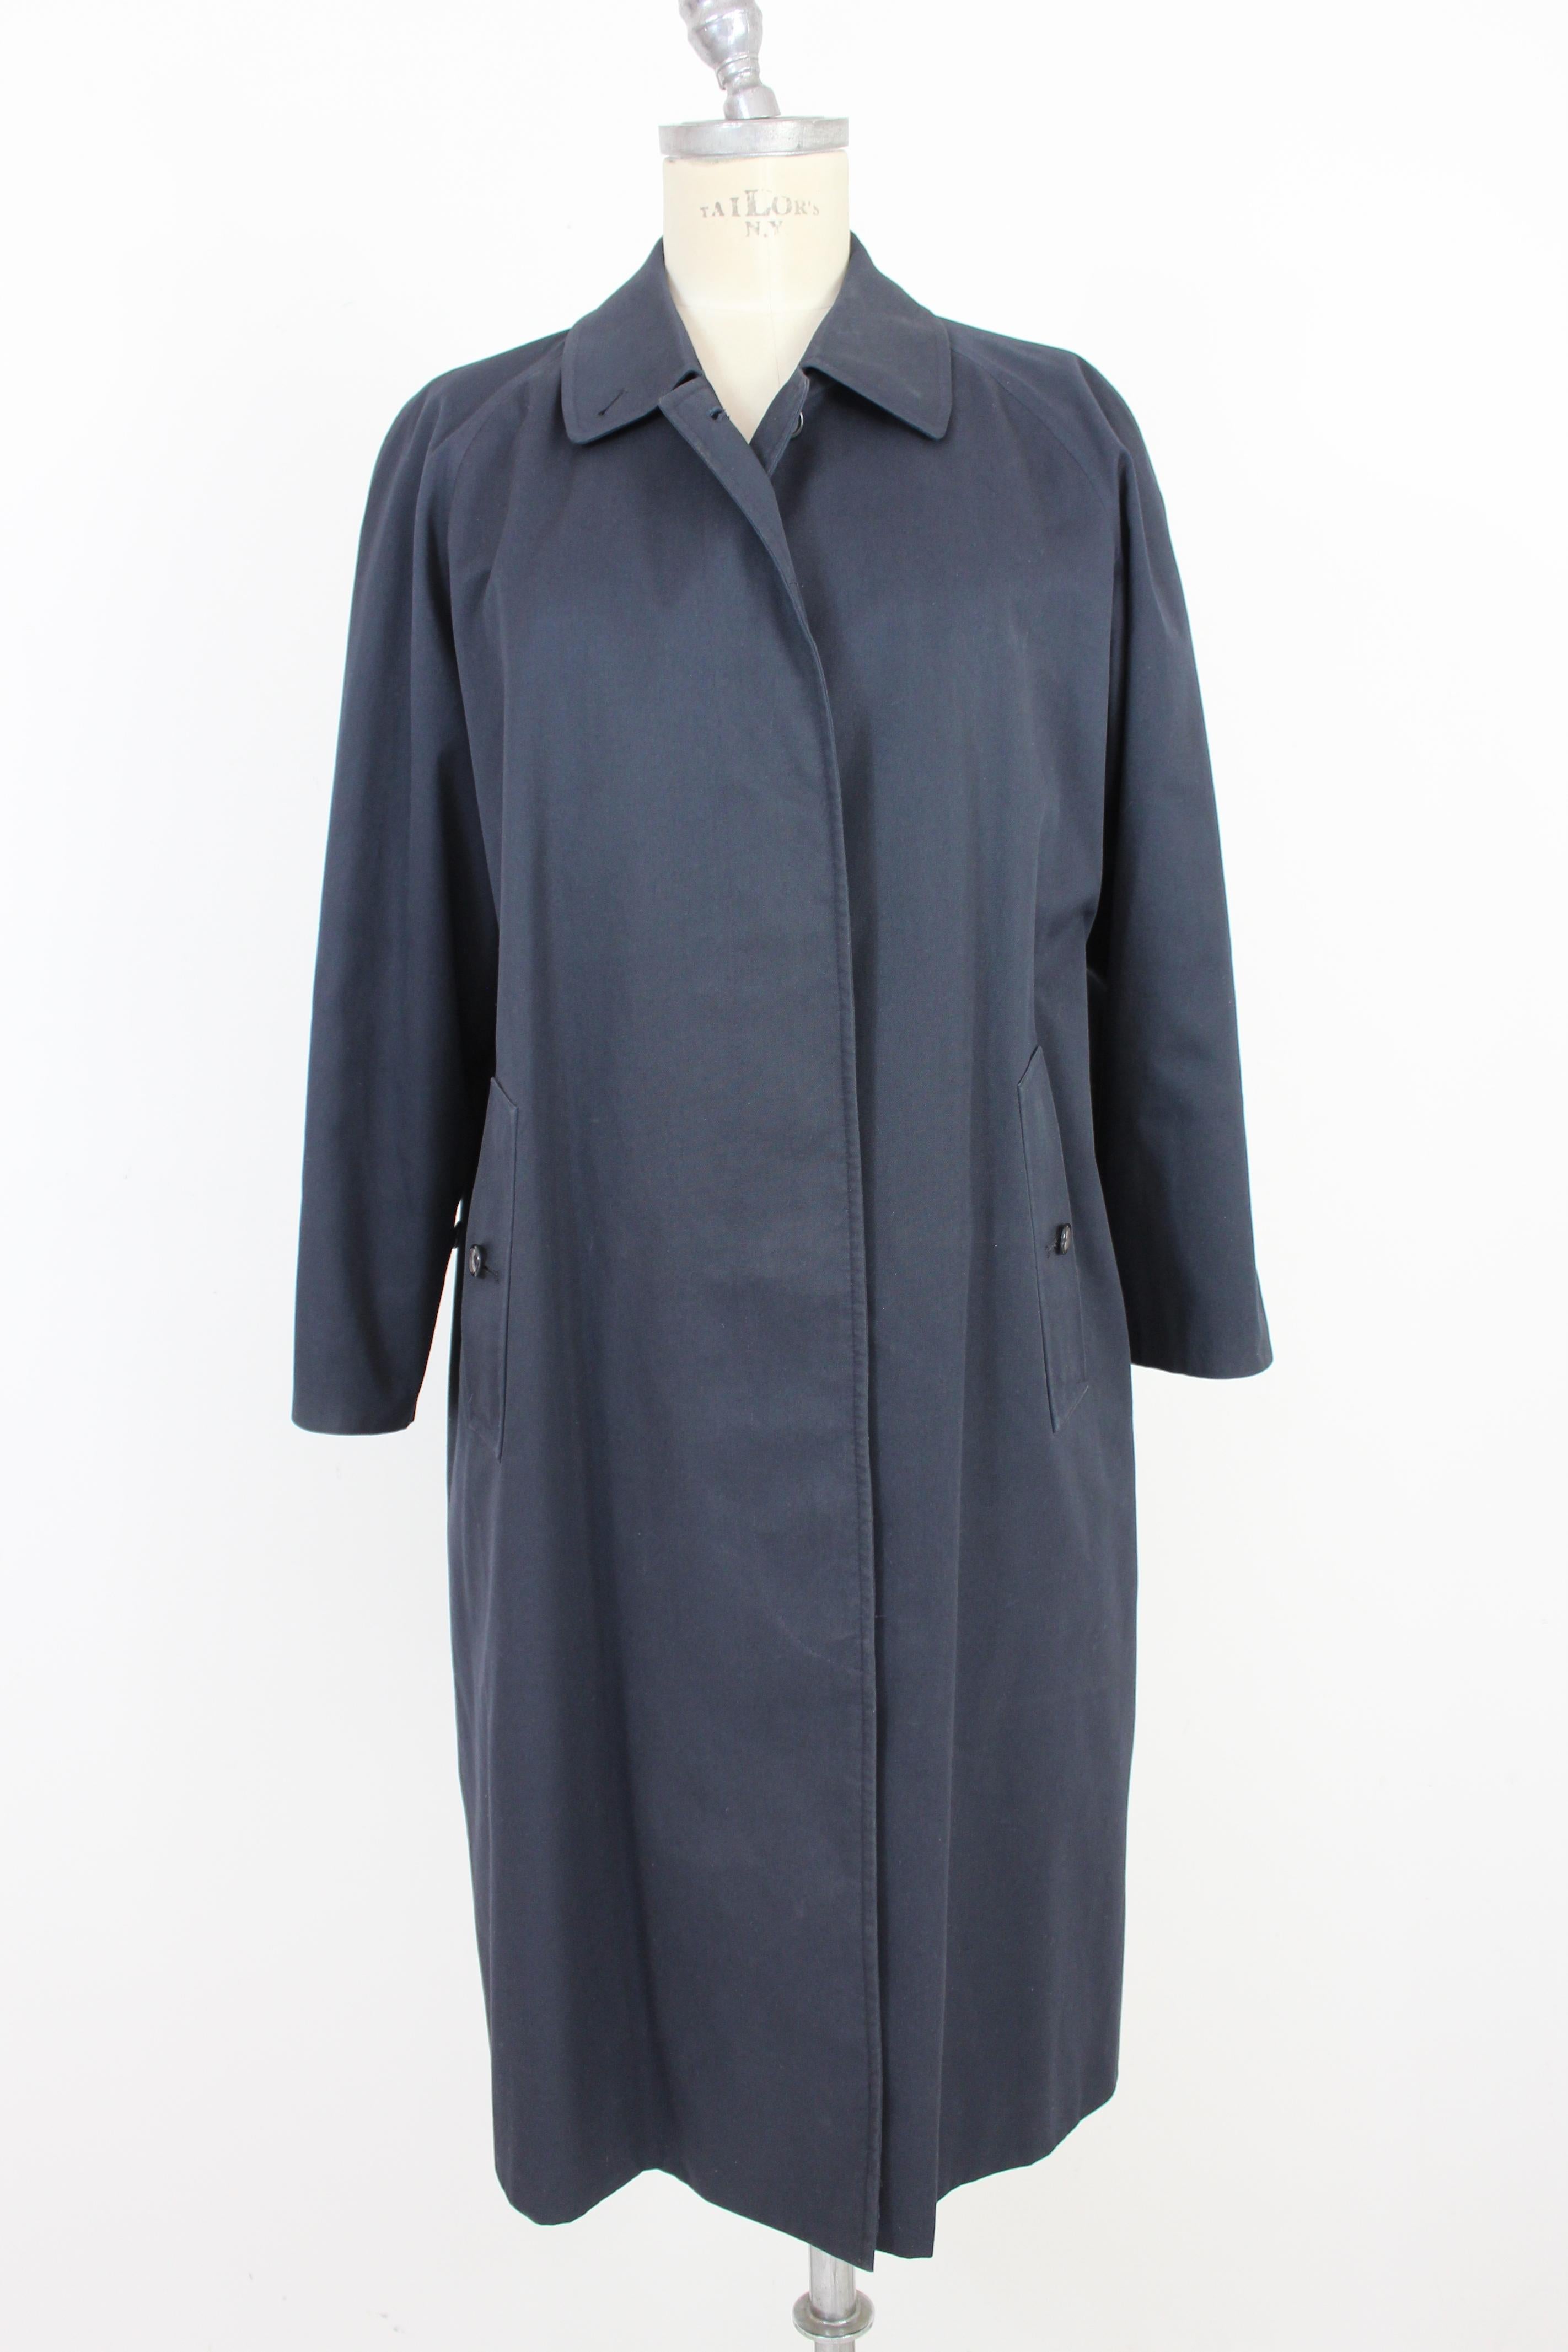 Burberry 80s vintage women's coat. Classic, long, blue raincoat. Fabric 51% cotton 49% polyester. Made in Italy.

Condition: Excellent

This item has been used a few times but remains in excellent condition. There are no visible signs of wear, and